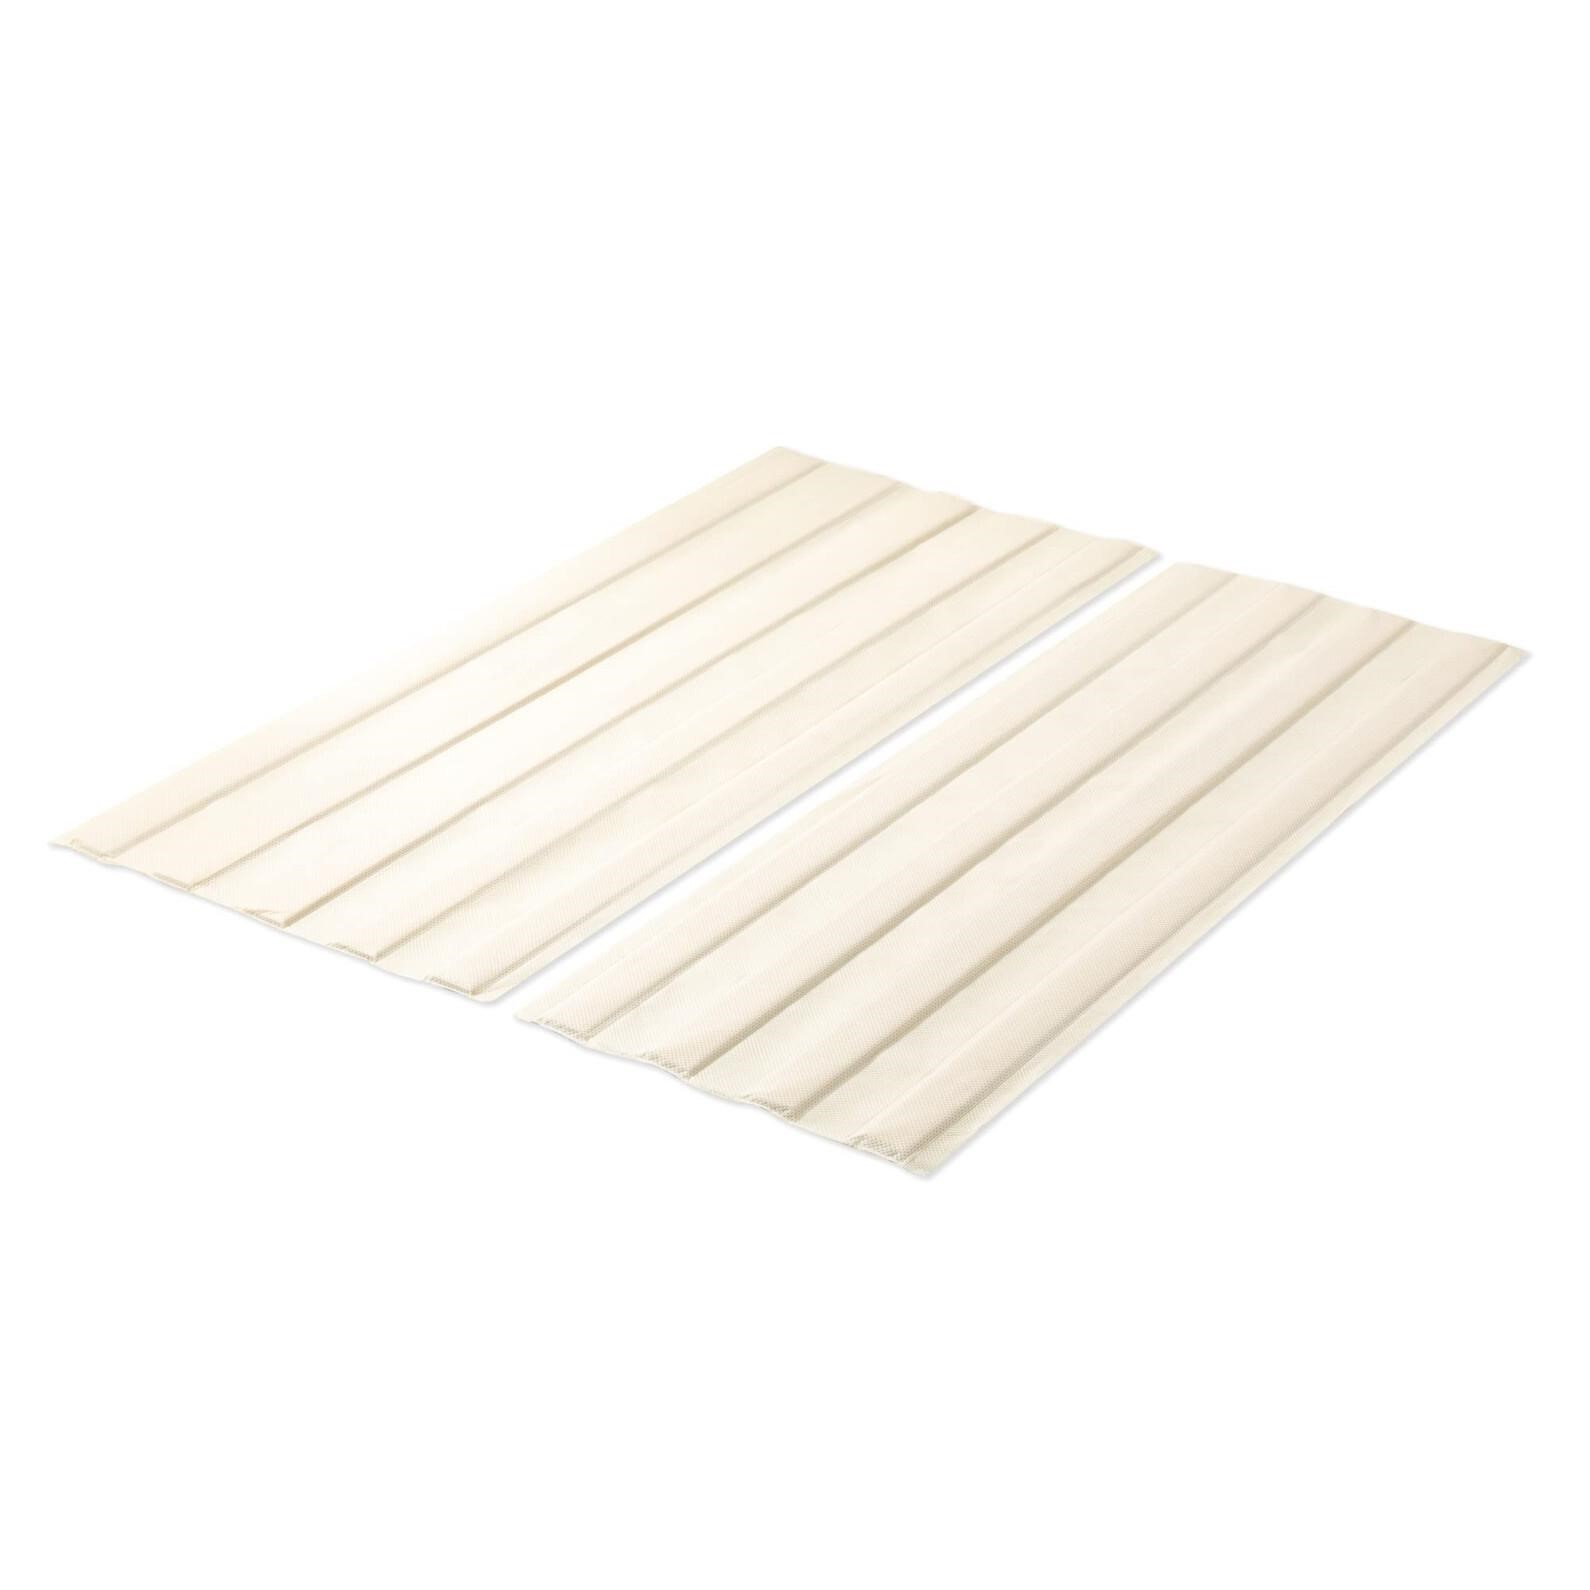 Mellow Fabric Covered Wood Slats, Bunkie Board Ma